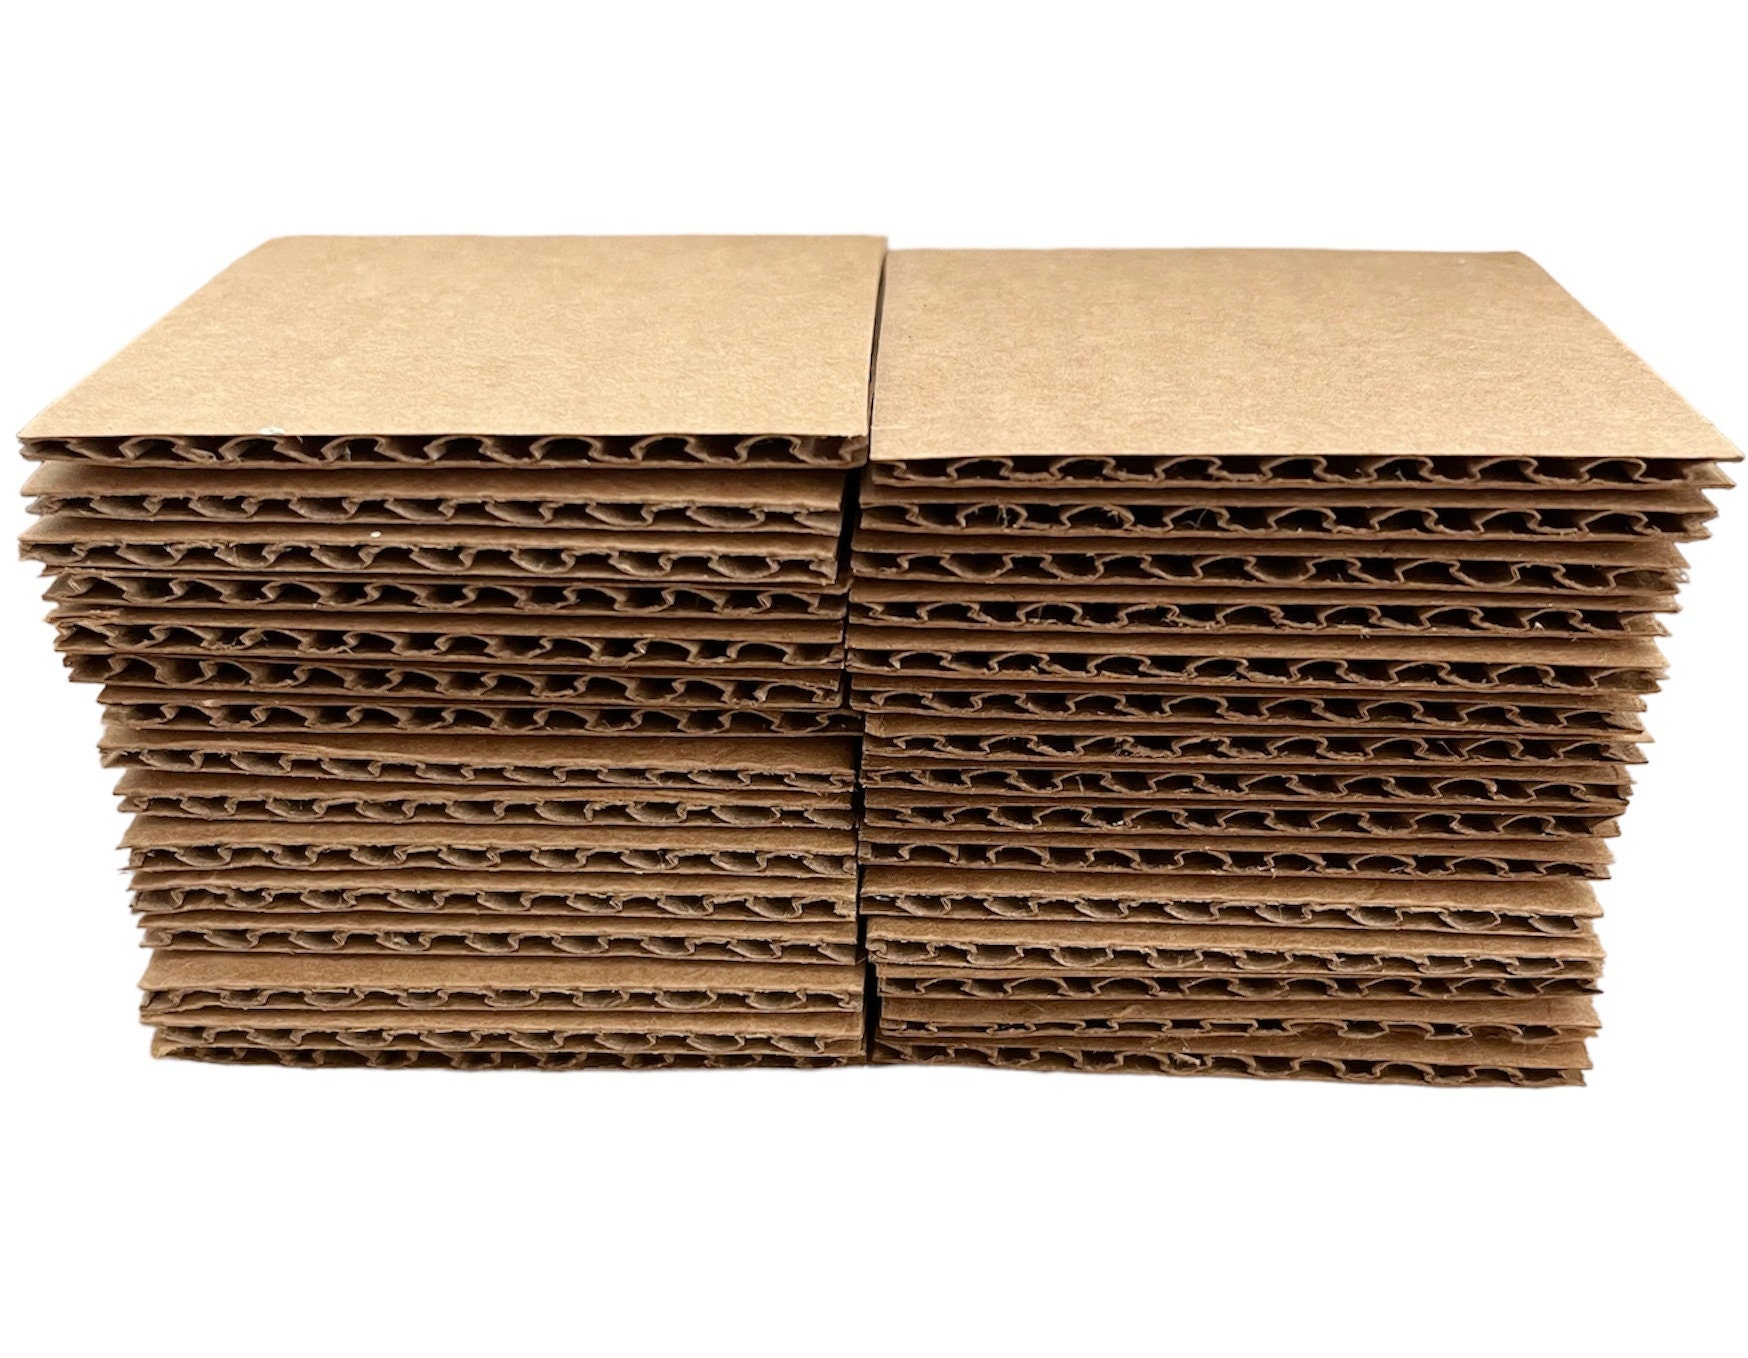 Large Corrugated Pads in Stock - ULINE  Large cardboard sheets, Corrugated,  Pad